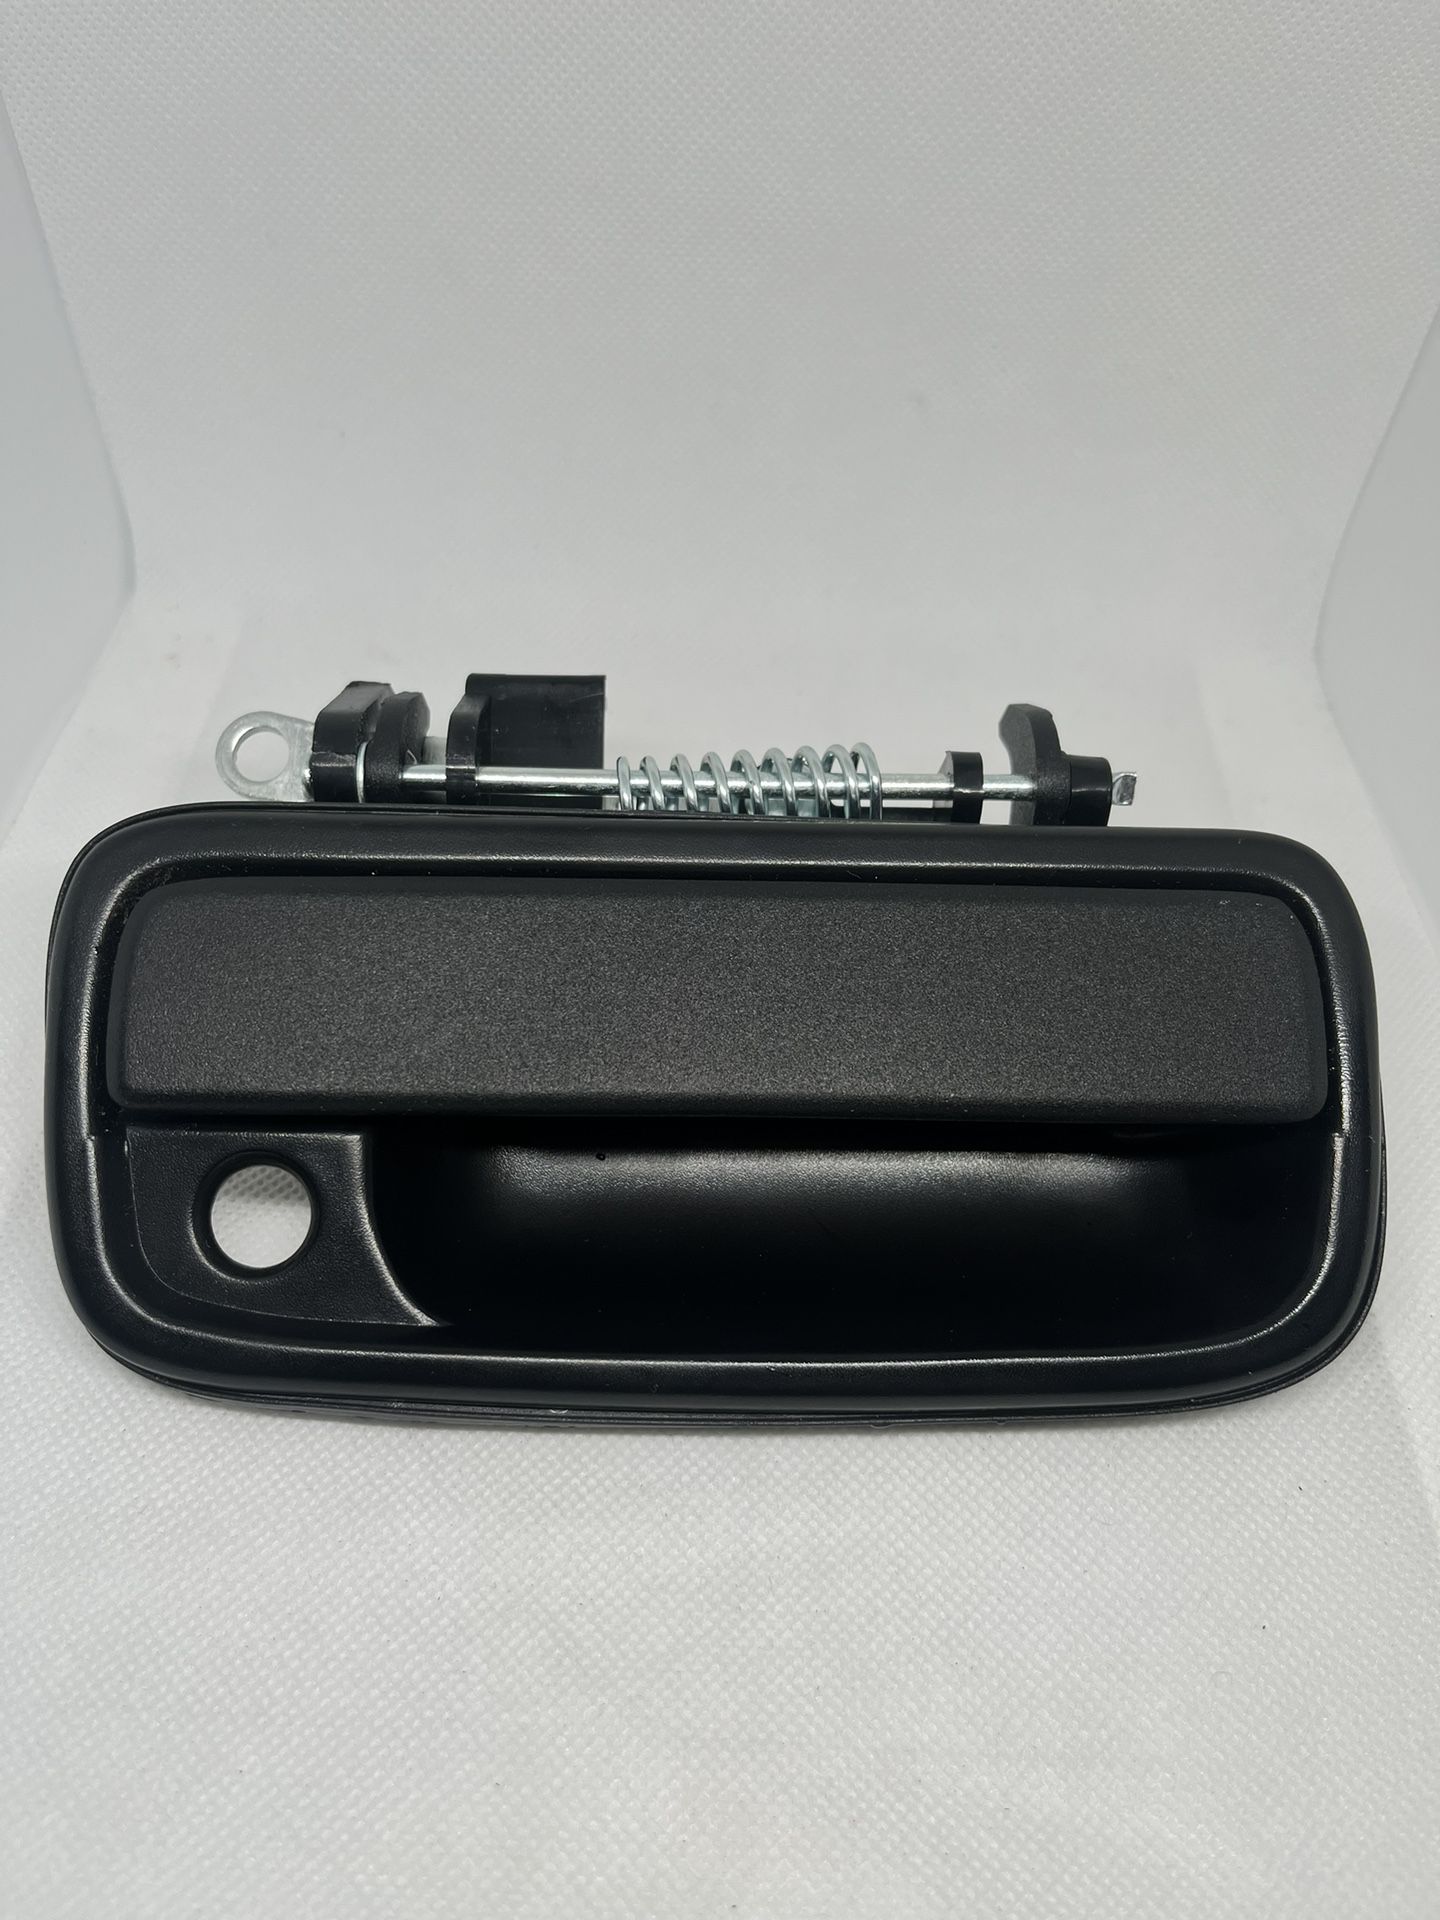 Exterior Door Handle For 1(contact info removed) Toyota Tacoma Front Passenger Side Black